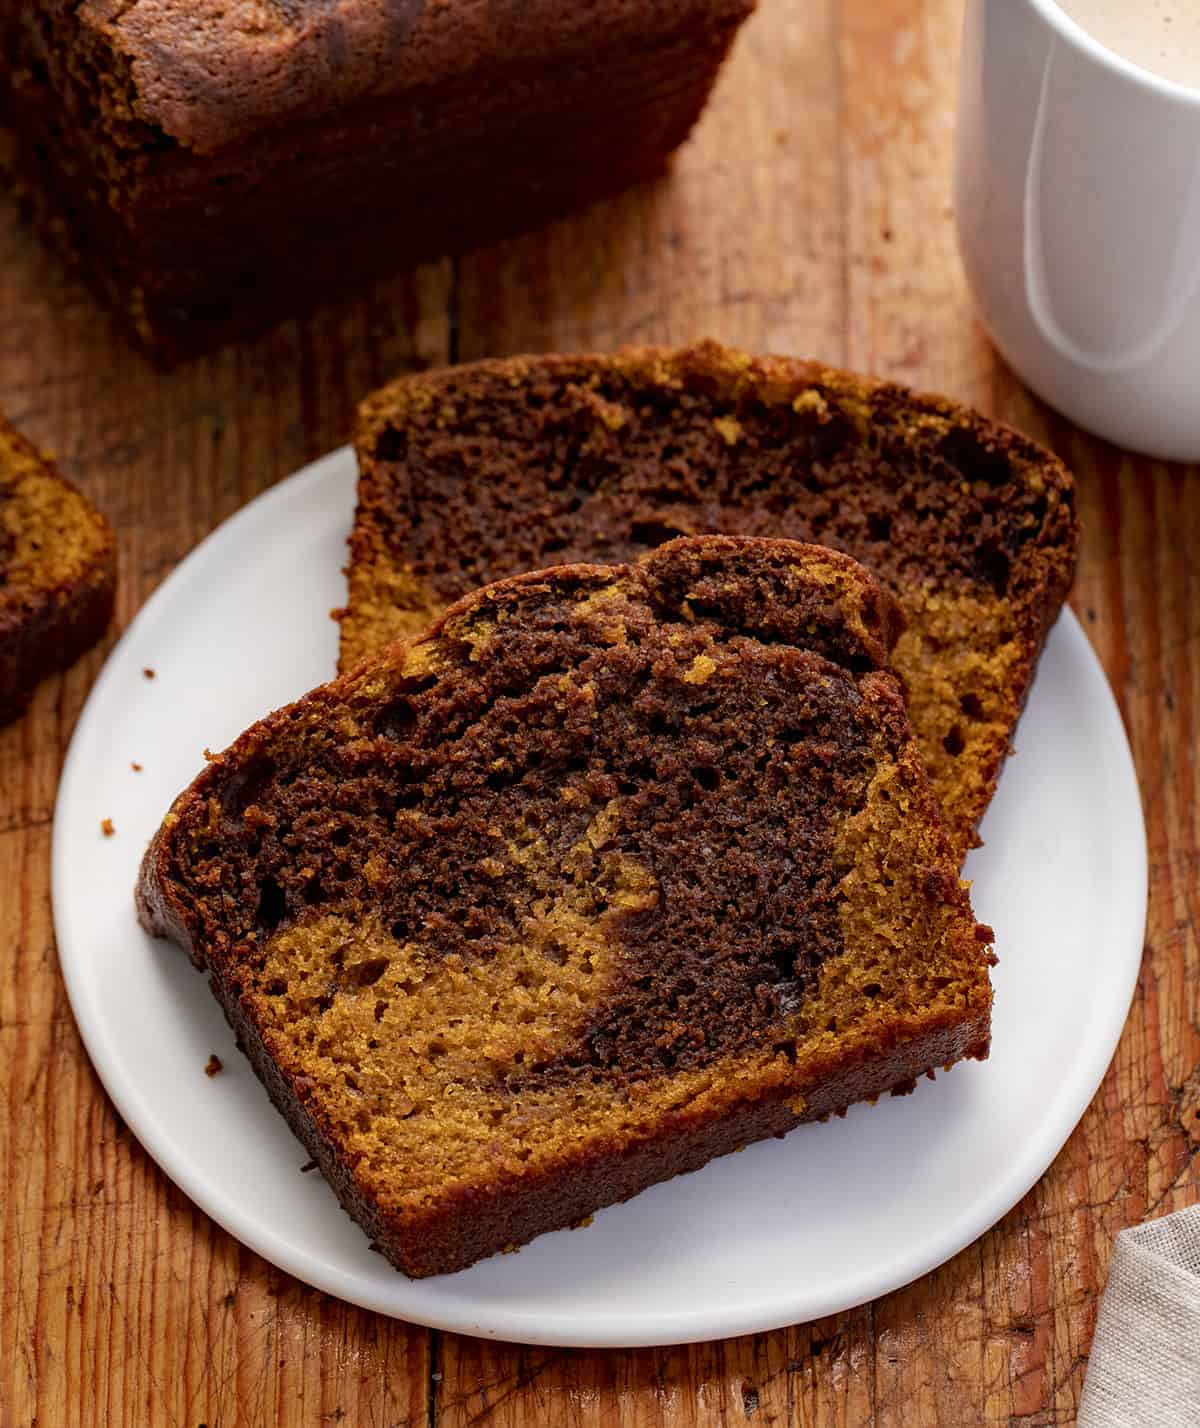 Pieces of Pumpkin Chocolate Bread on Plate